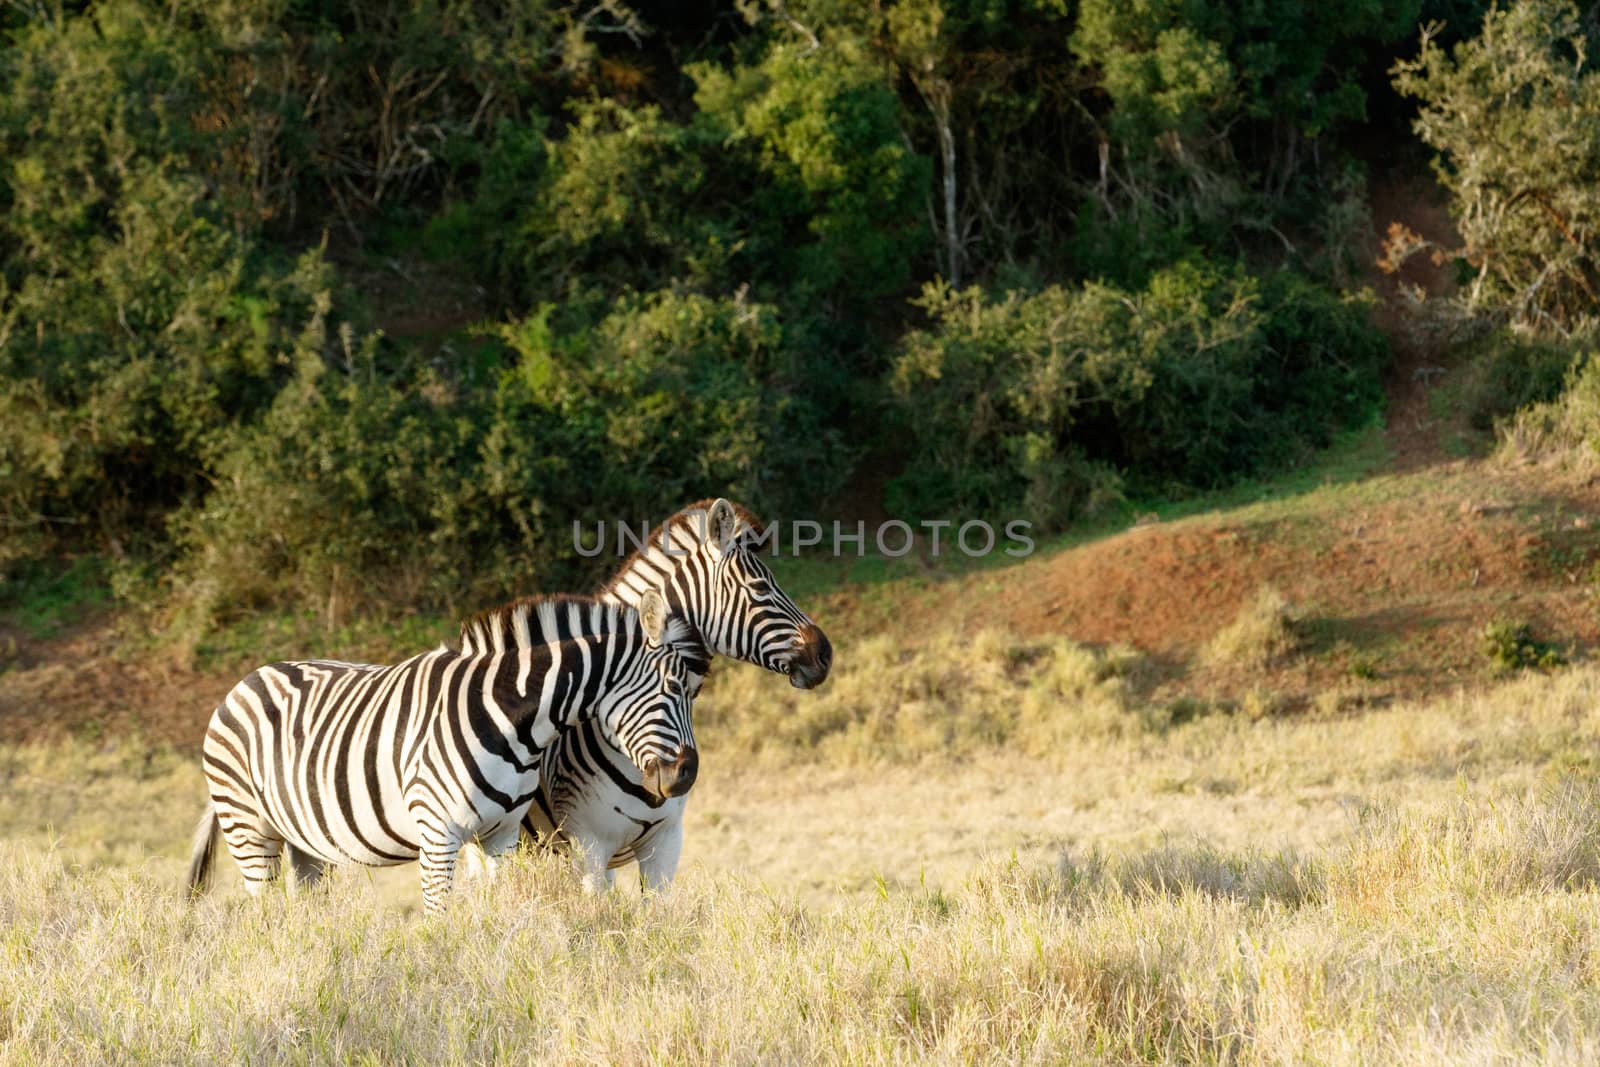 A Zebra giving a good rub against the other in the field.